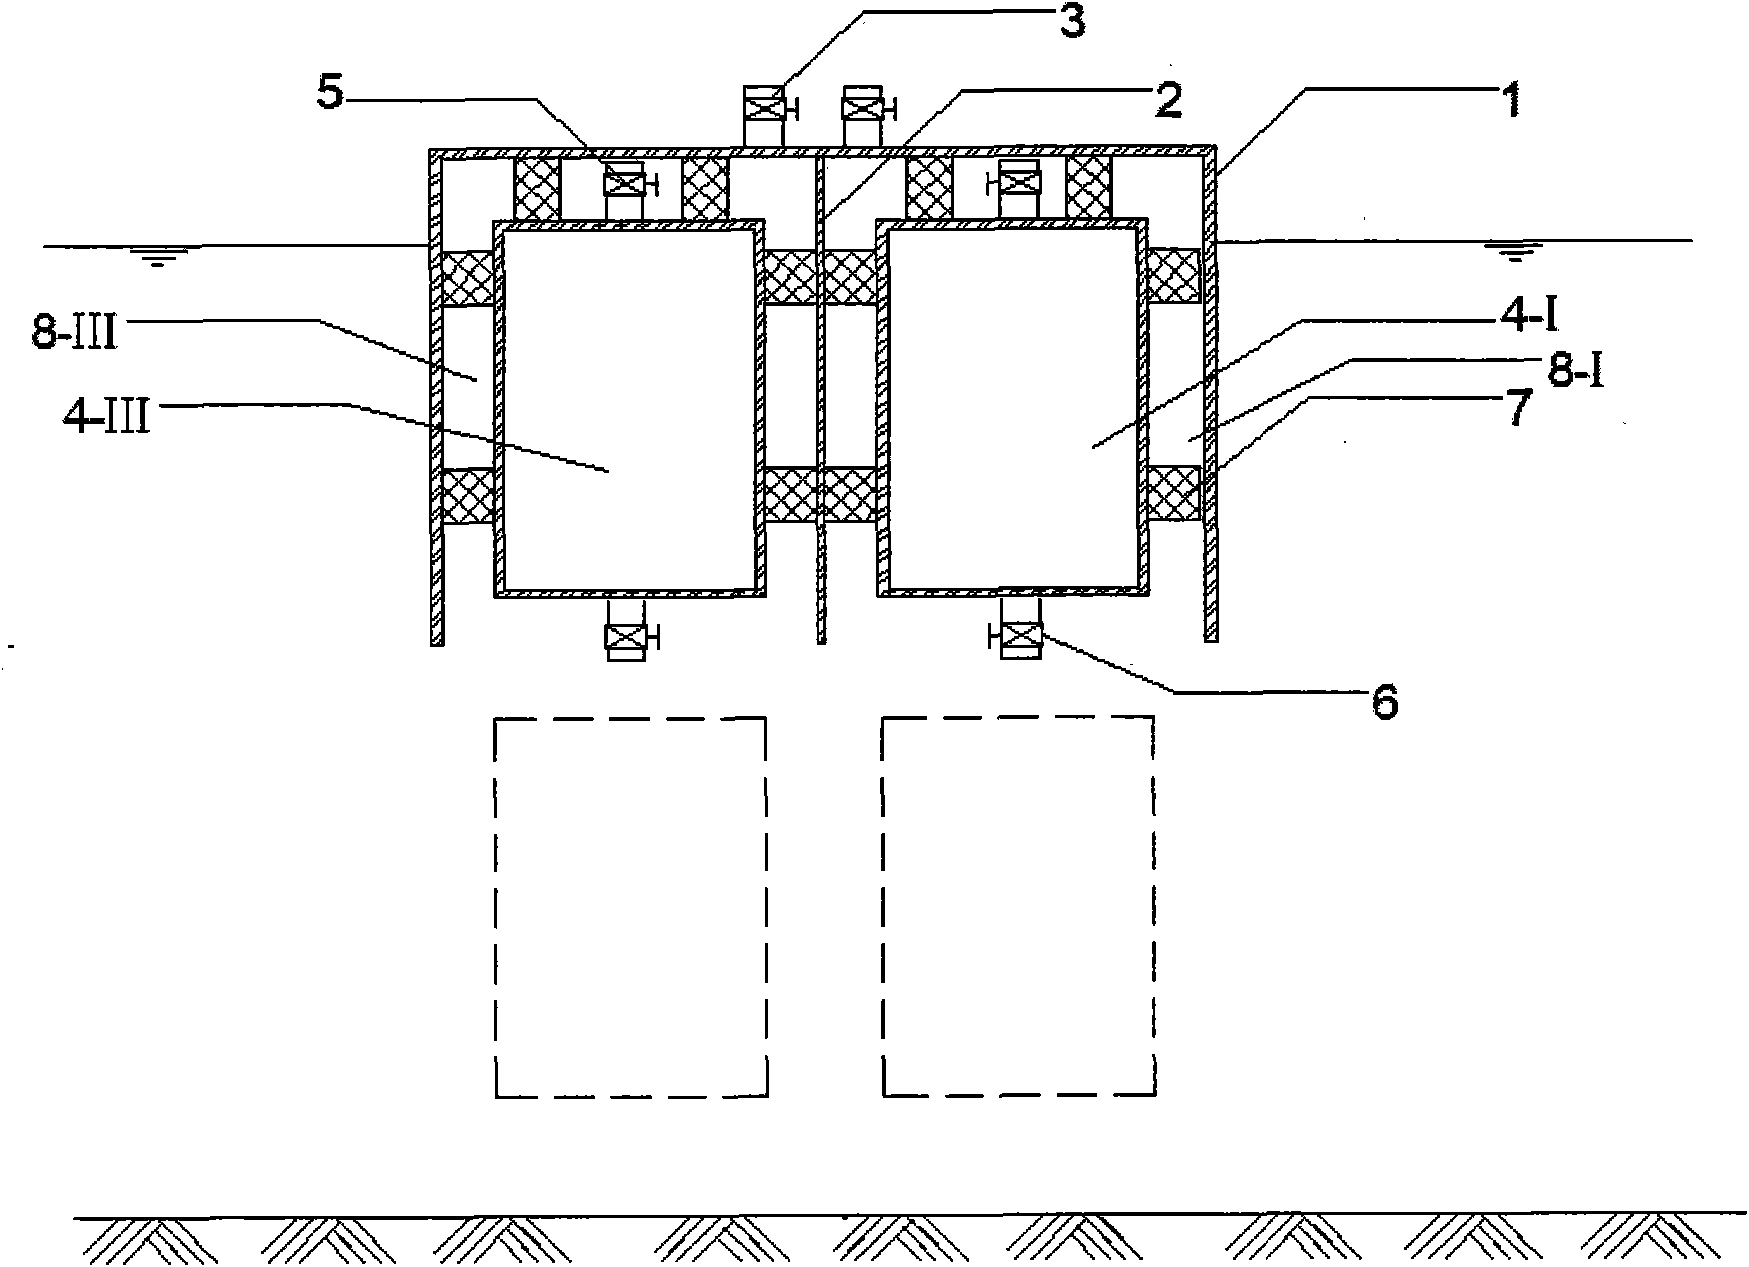 Built-in buoy towing barrel-shaped foundation sinking method